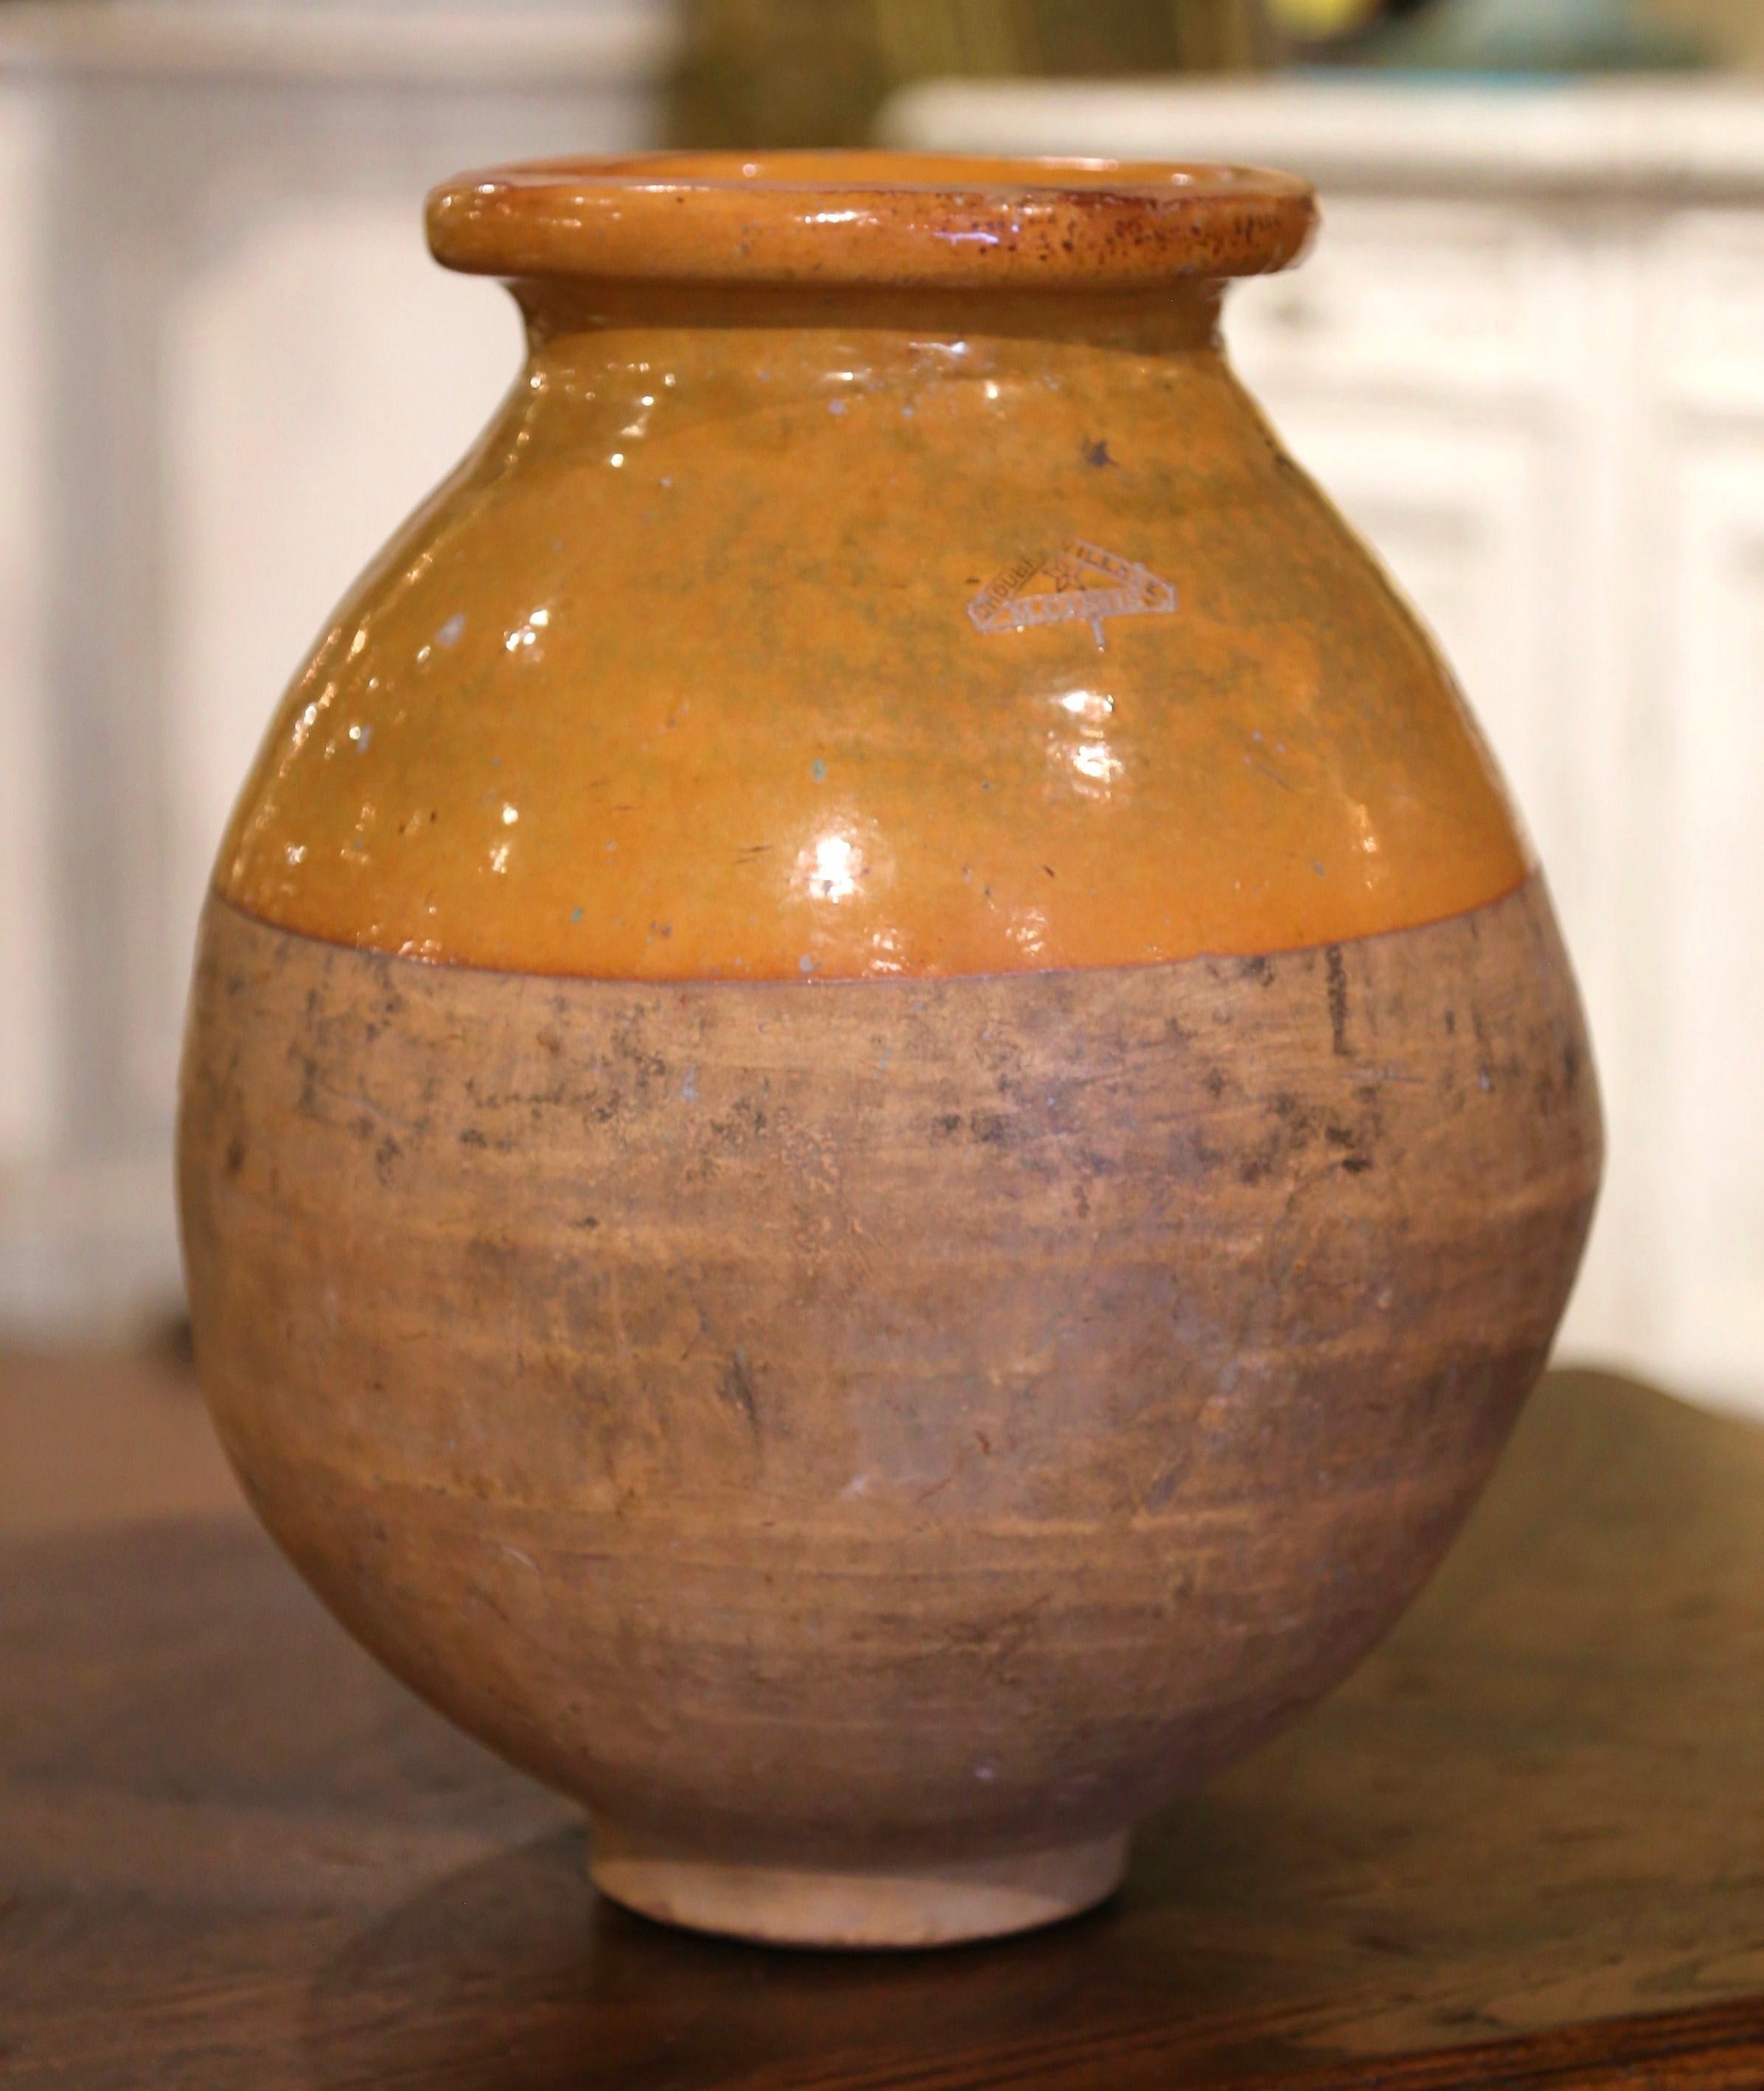 This antique earthenware olive oil jar was created in Southern France, circa 1880. Made of blond clay and neutral in color, the terracotta vase has a traditional round shape. The rustic, time-worn pot features a yellow glaze around the neck and